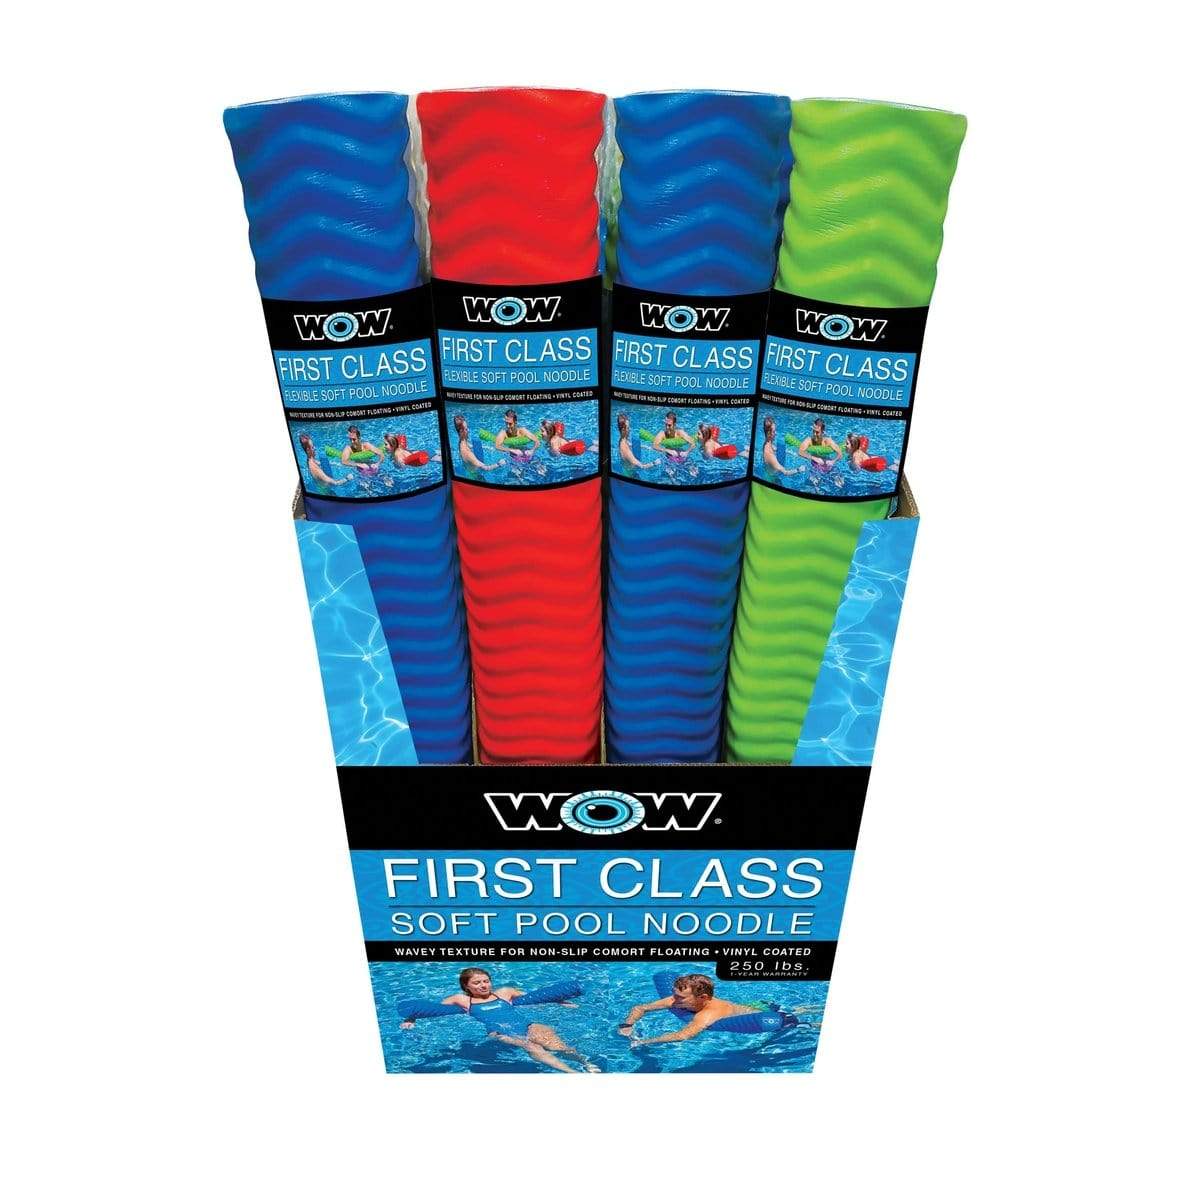 WOW World of Watersports Not Qualified for Free Shipping WOW World of Watersports Foam Pool Noodle 12-pk #20-2060